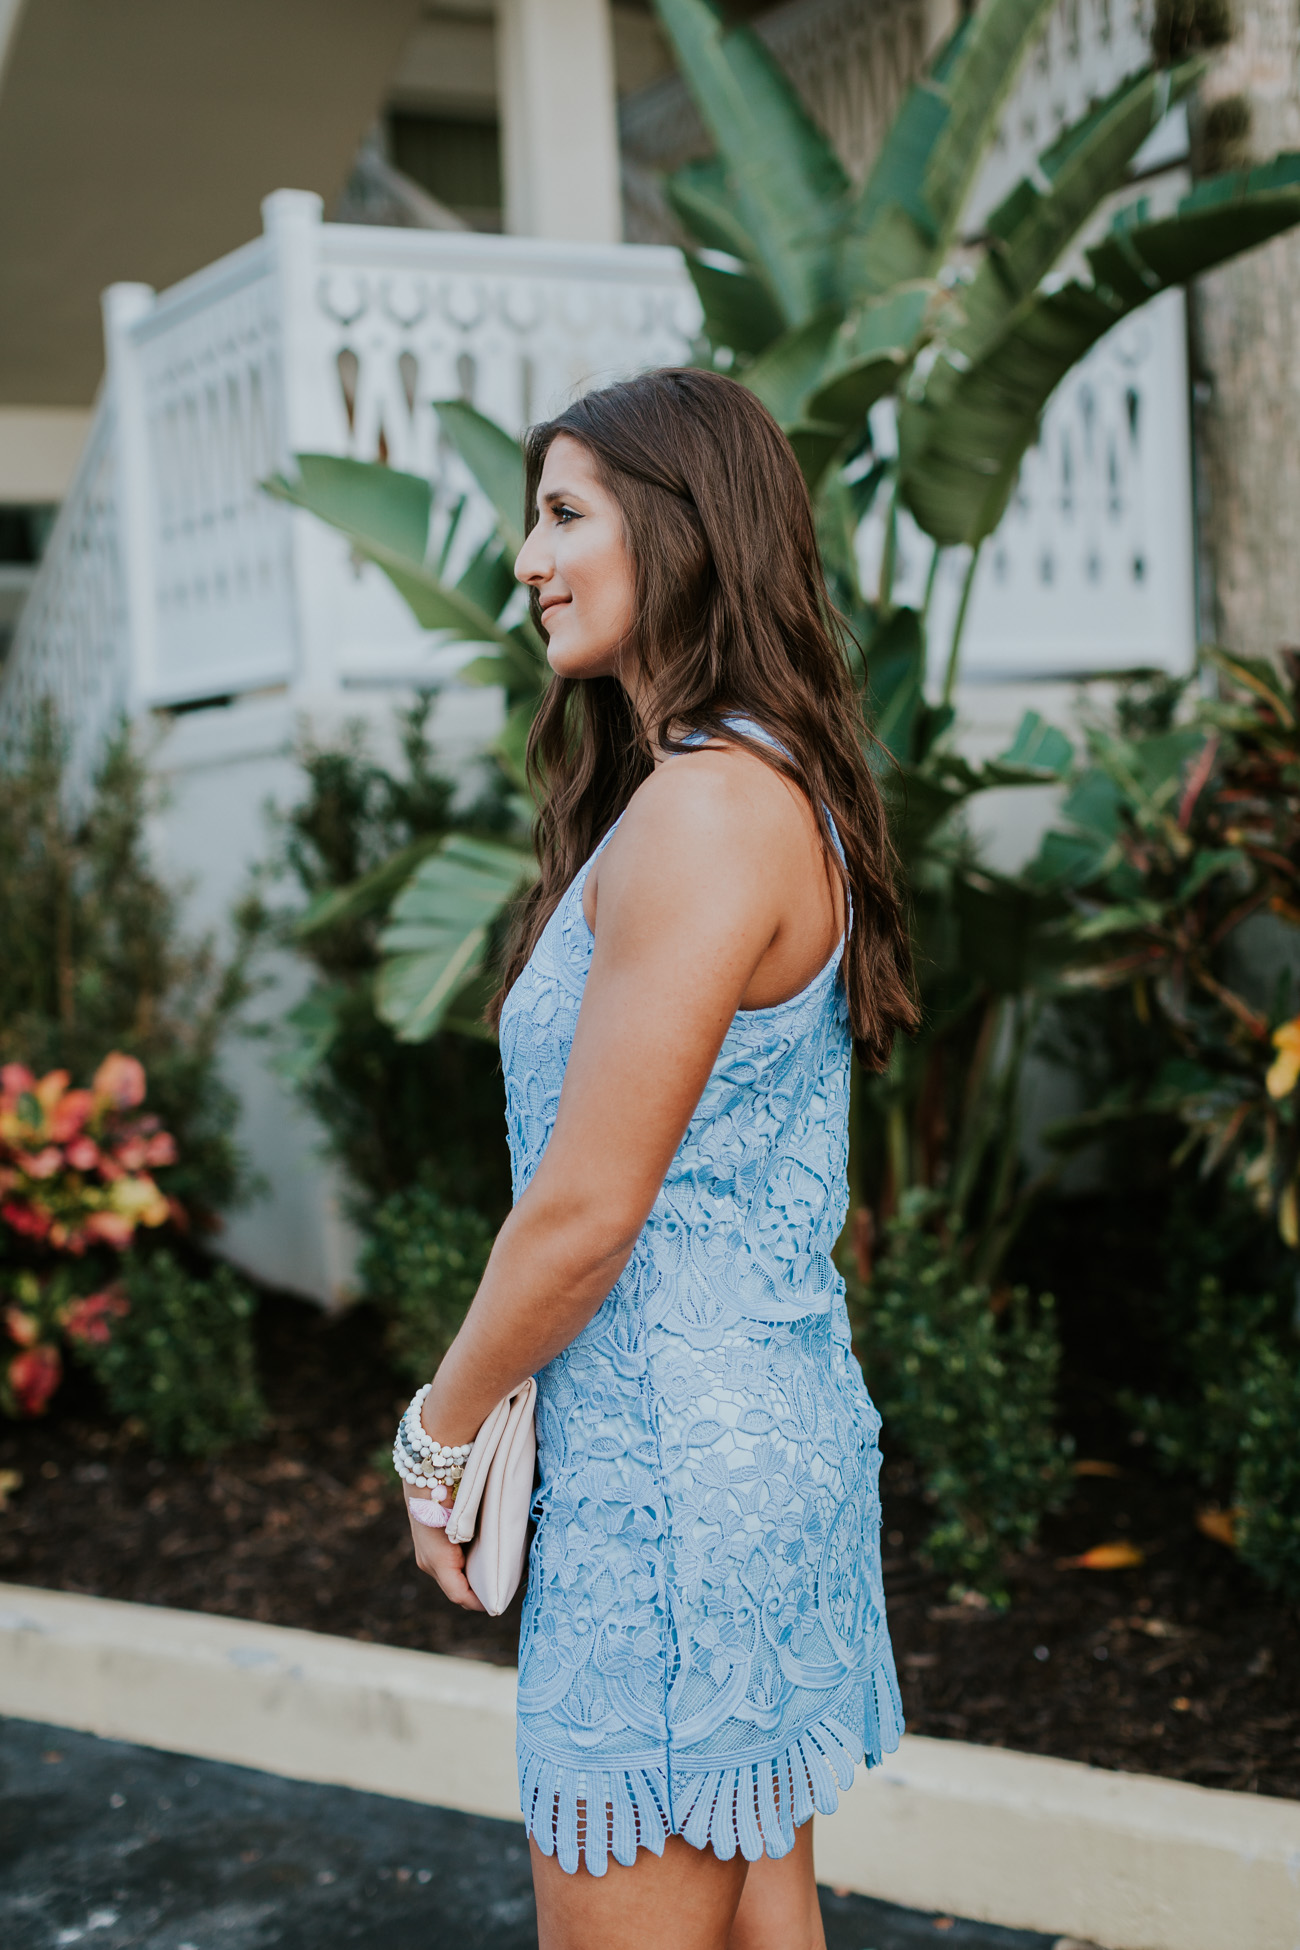 caspian shift dress, lovers and friends caspian dress, vacation outfit, tassel bracelets, tassel jewelry, free people lace up sandals, free people wrap around sandals, turquoise bracelets, vacation style, beachy outfit // grace wainwright a southern drawl